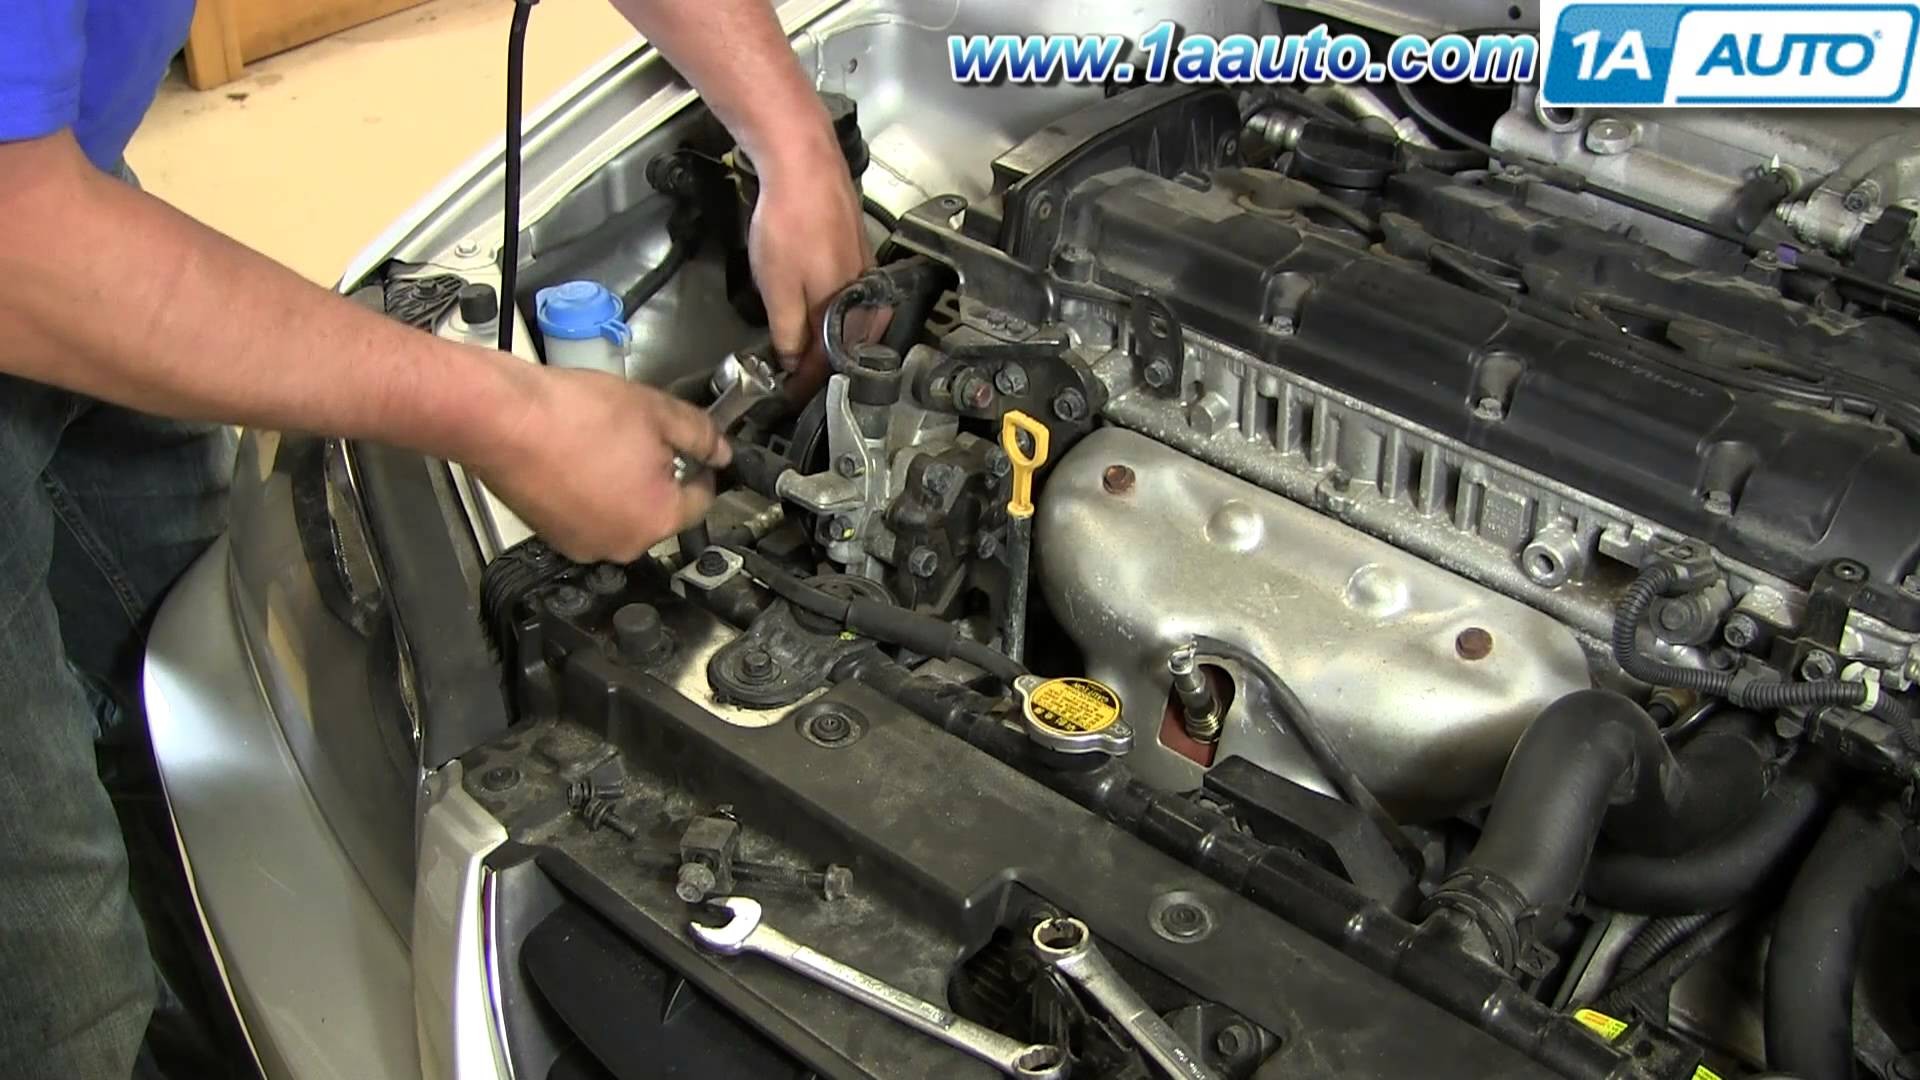 2004 Hyundai Accent Engine Diagram How to Install Replace Power Steering Belt 2001 06 Hyundai Elantra Of 2004 Hyundai Accent Engine Diagram